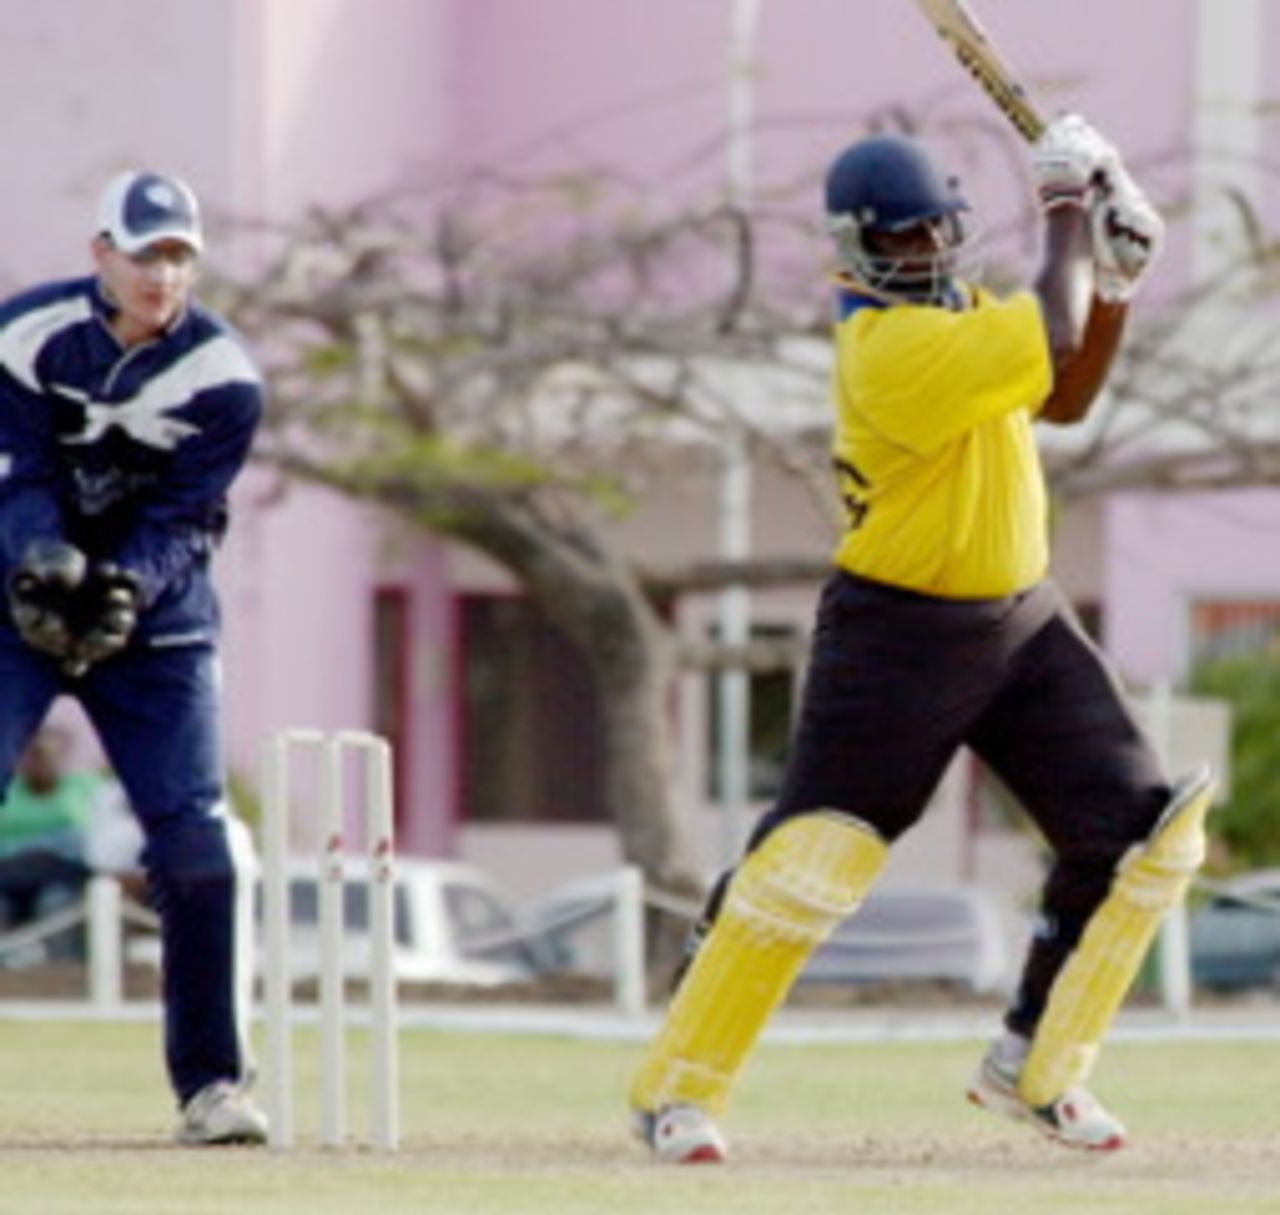 Shirley Clarke on his way to a hundred, University of the West Indies v Scotland, 3Ws Oval, Barbados, March 14, 2006